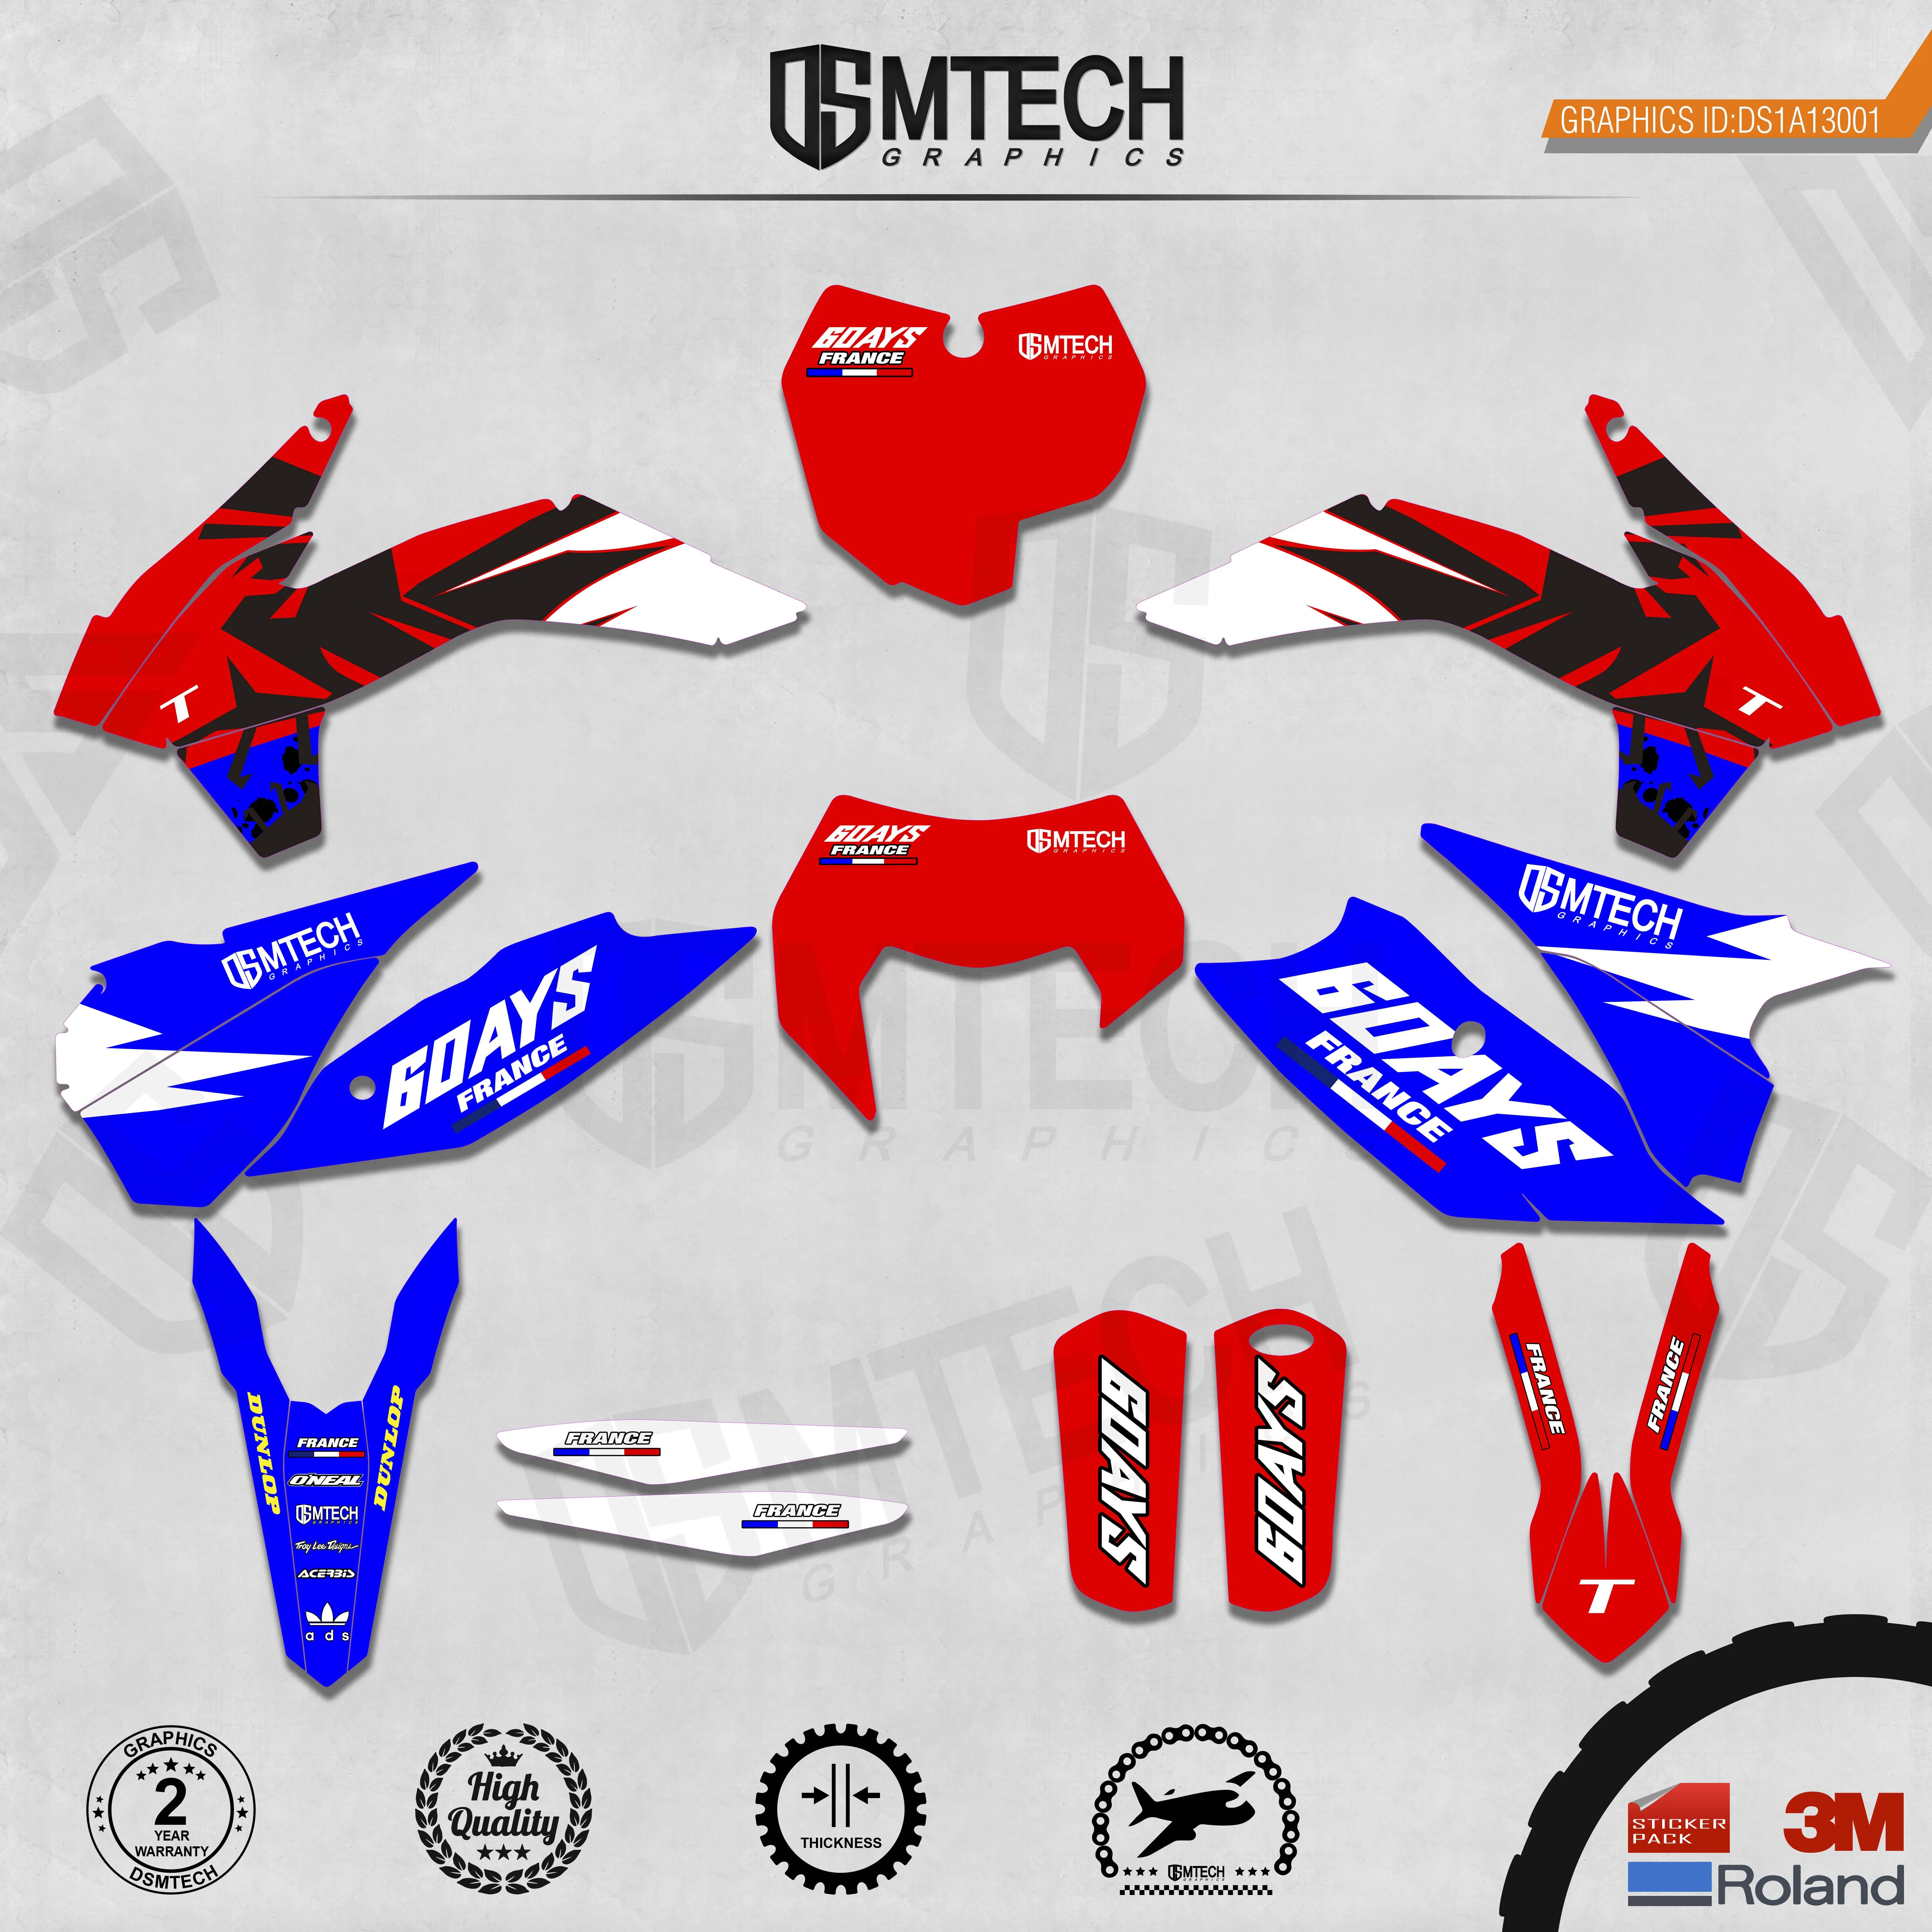 DSMTECH Customized Team Graphics Backgrounds Decals 3M Custom Stickers For 2013-2014 SXF 2015 SXF 2014-2015 EXC 2016 EXC  001